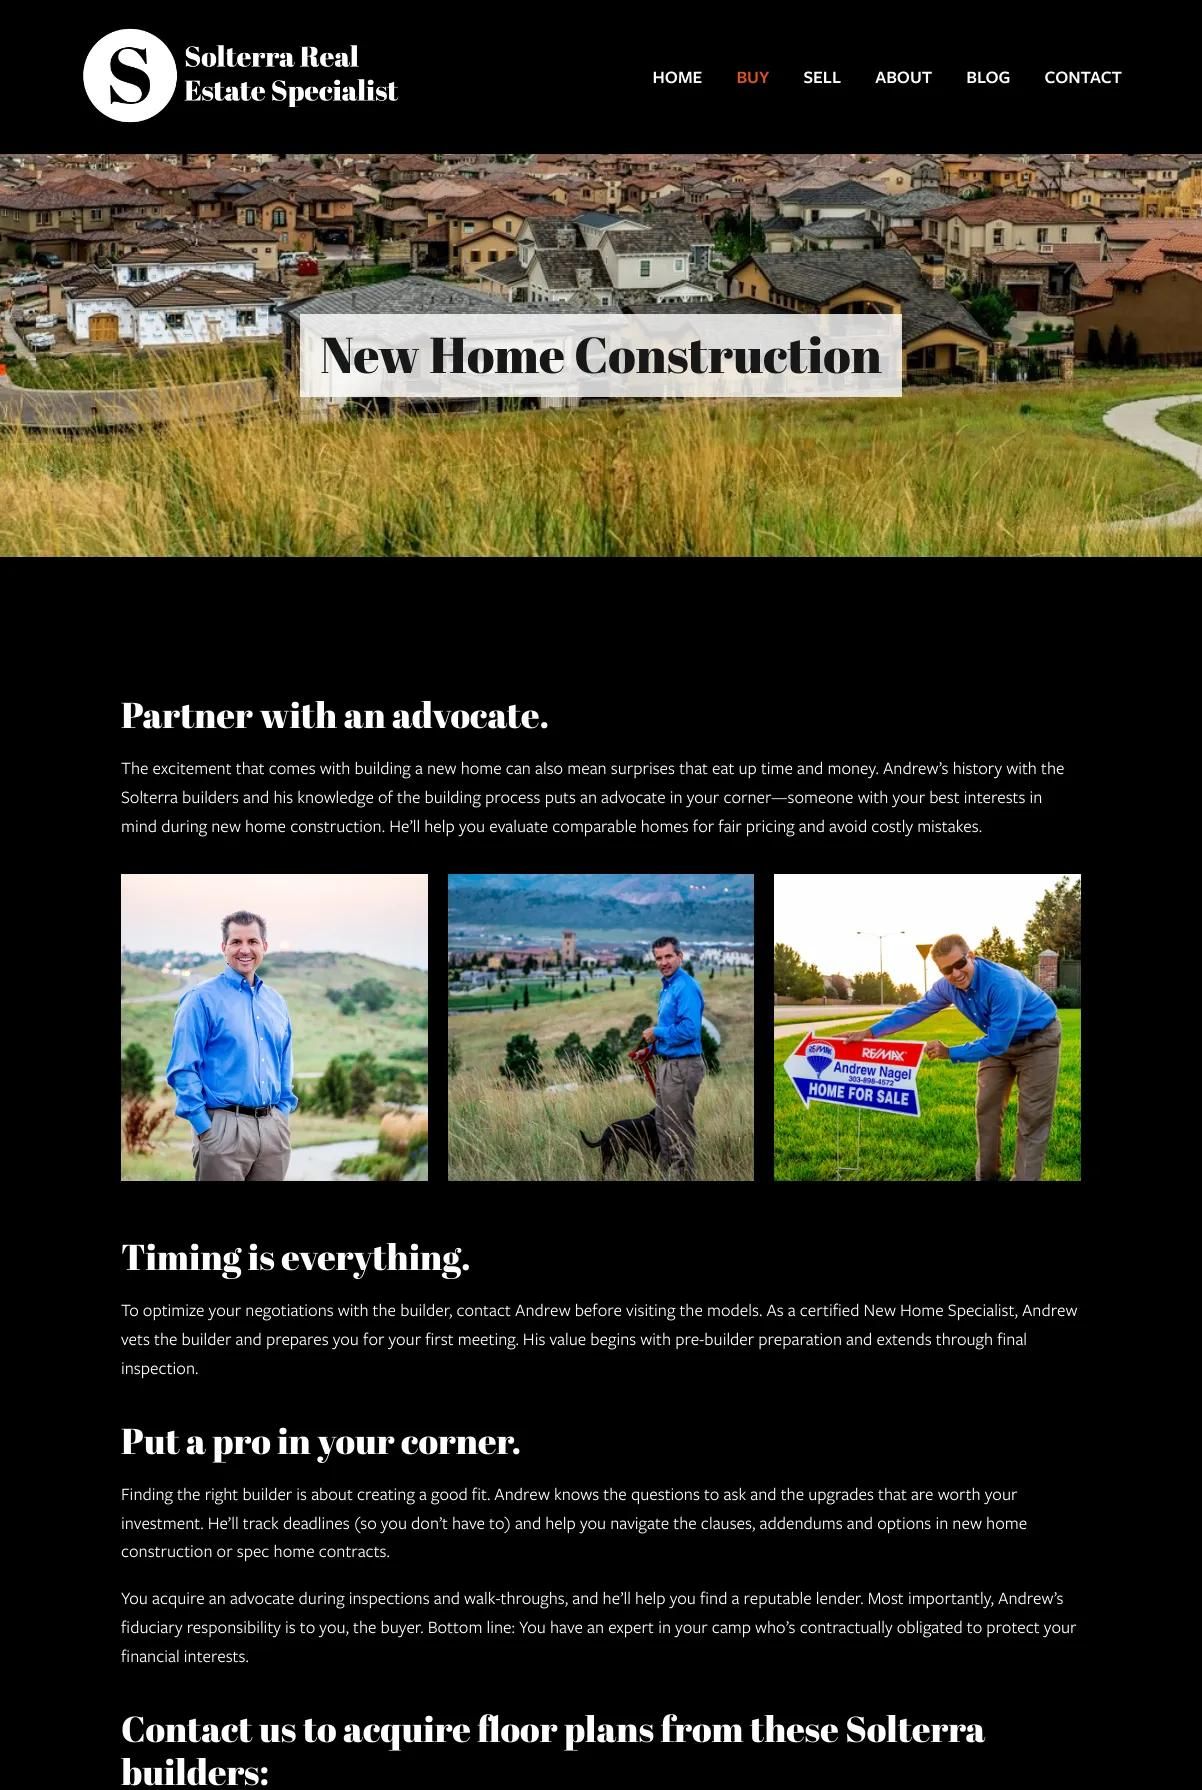 Screenshot 2 of Solterra Real Estate Specialist (Example Squarespace Real Estate Website)